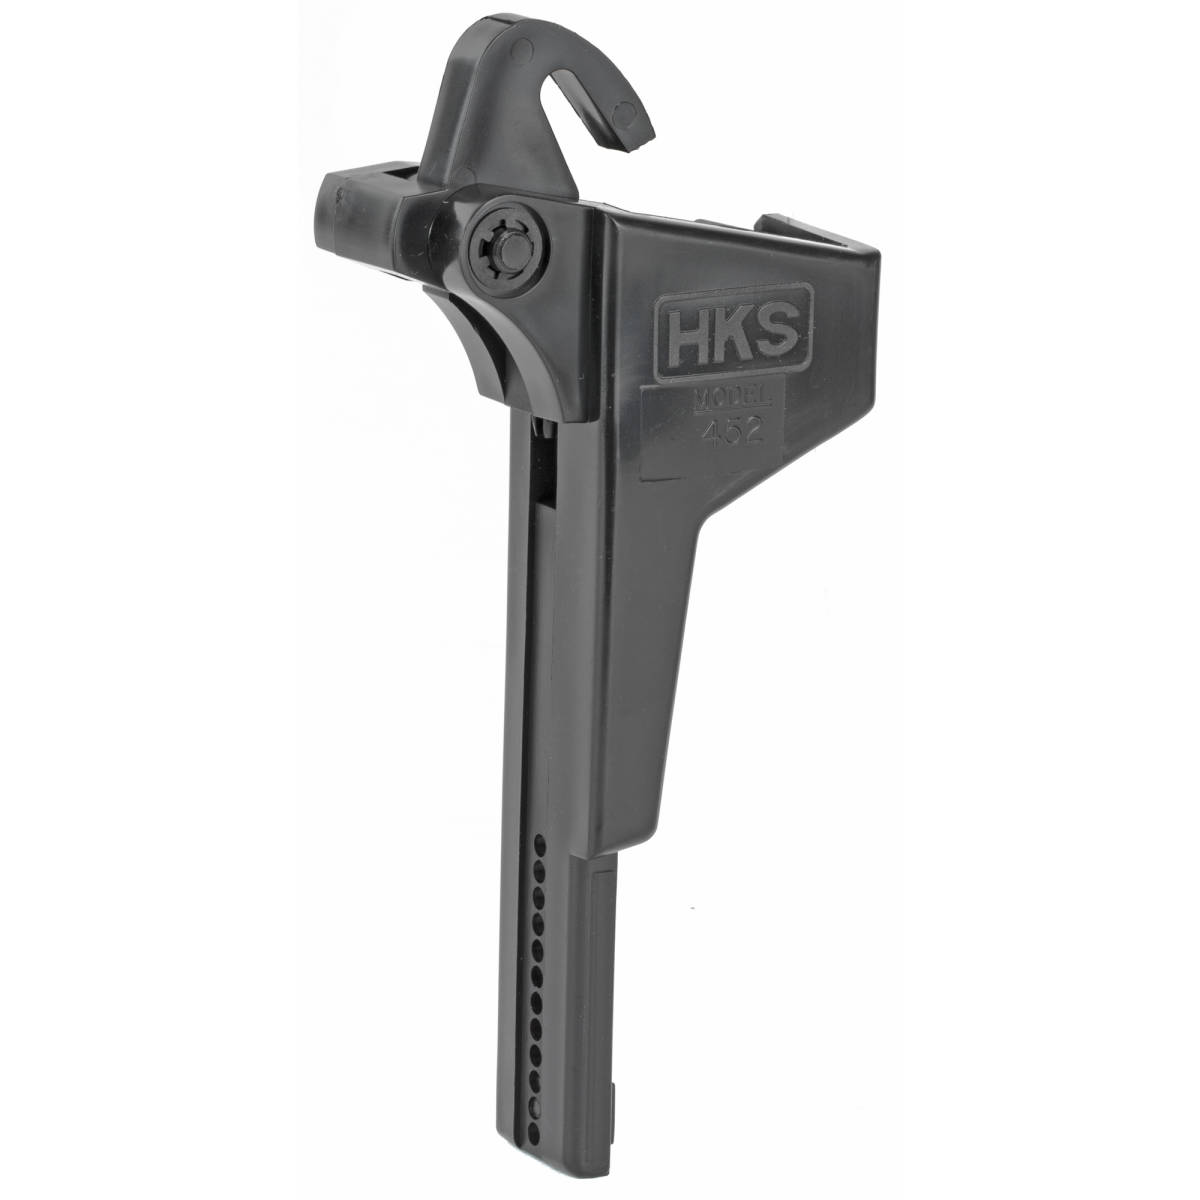 HKS 452 Double Stack Mag Loader Adjustable Style made of Plastic with...-img-0